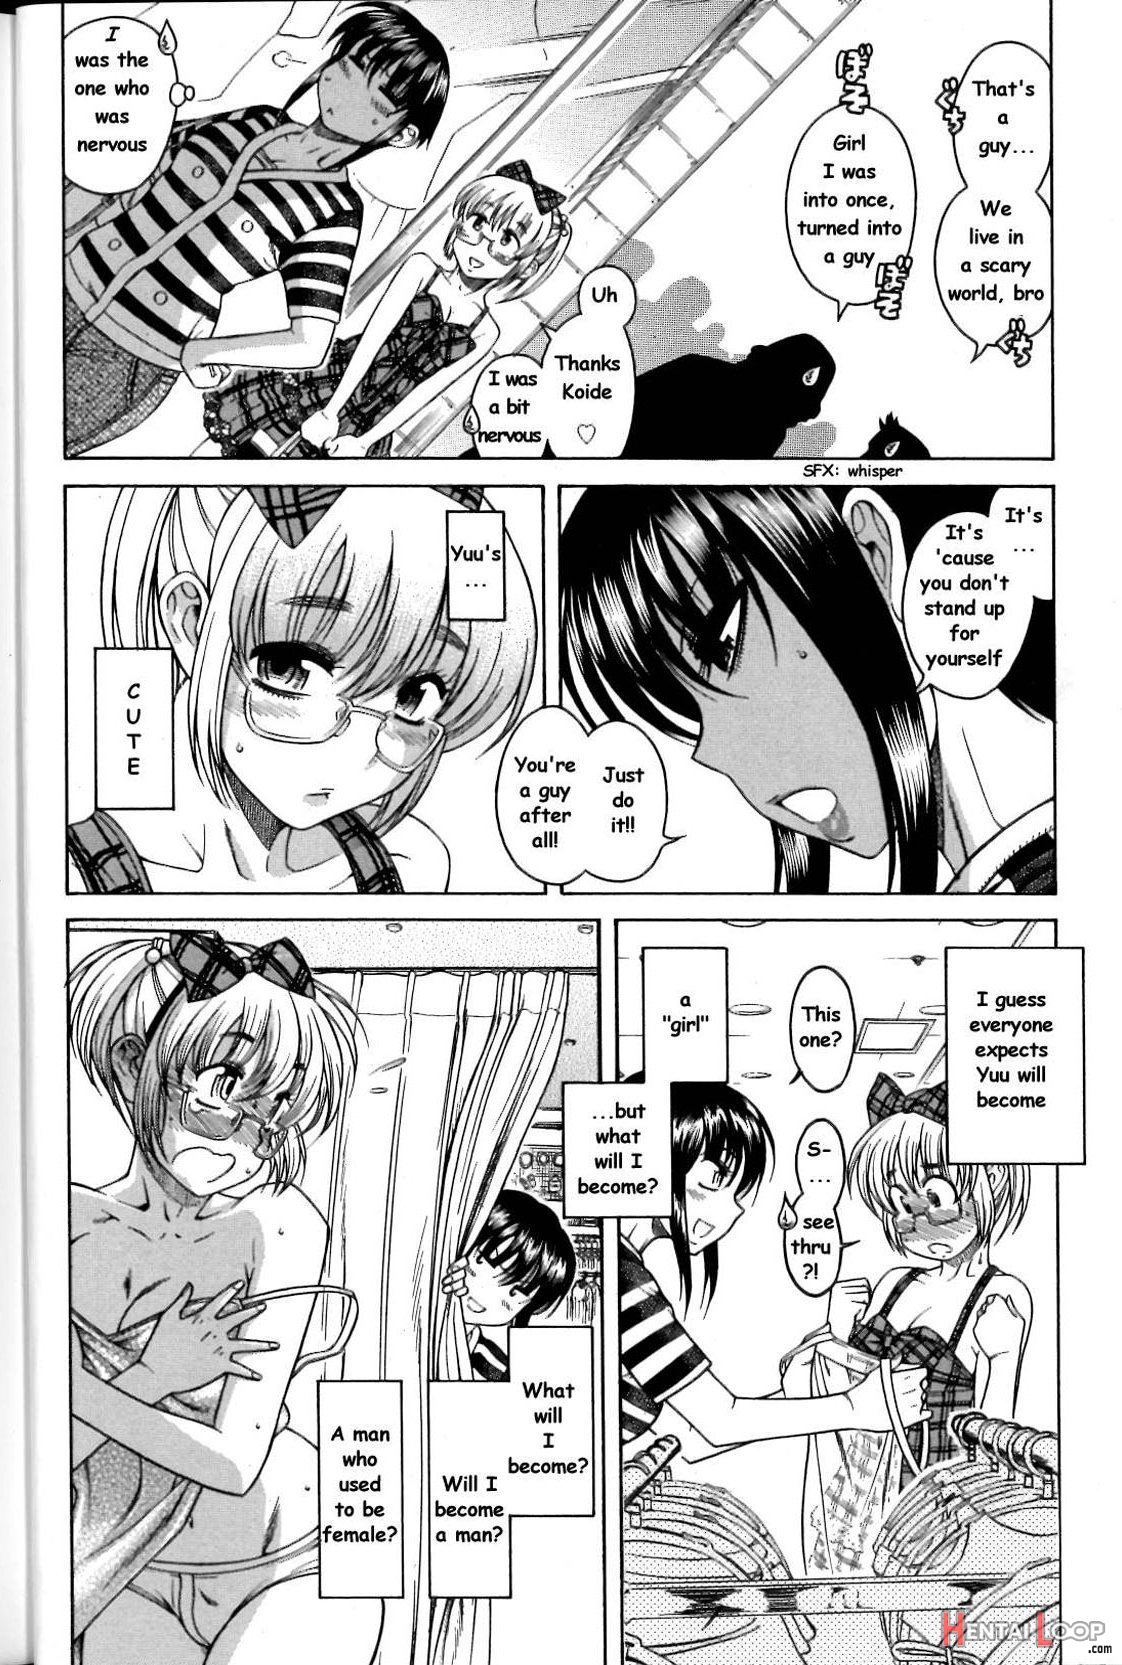 Boy Meets Girl, Girl Meets Boy 2- Single Page Version page 14